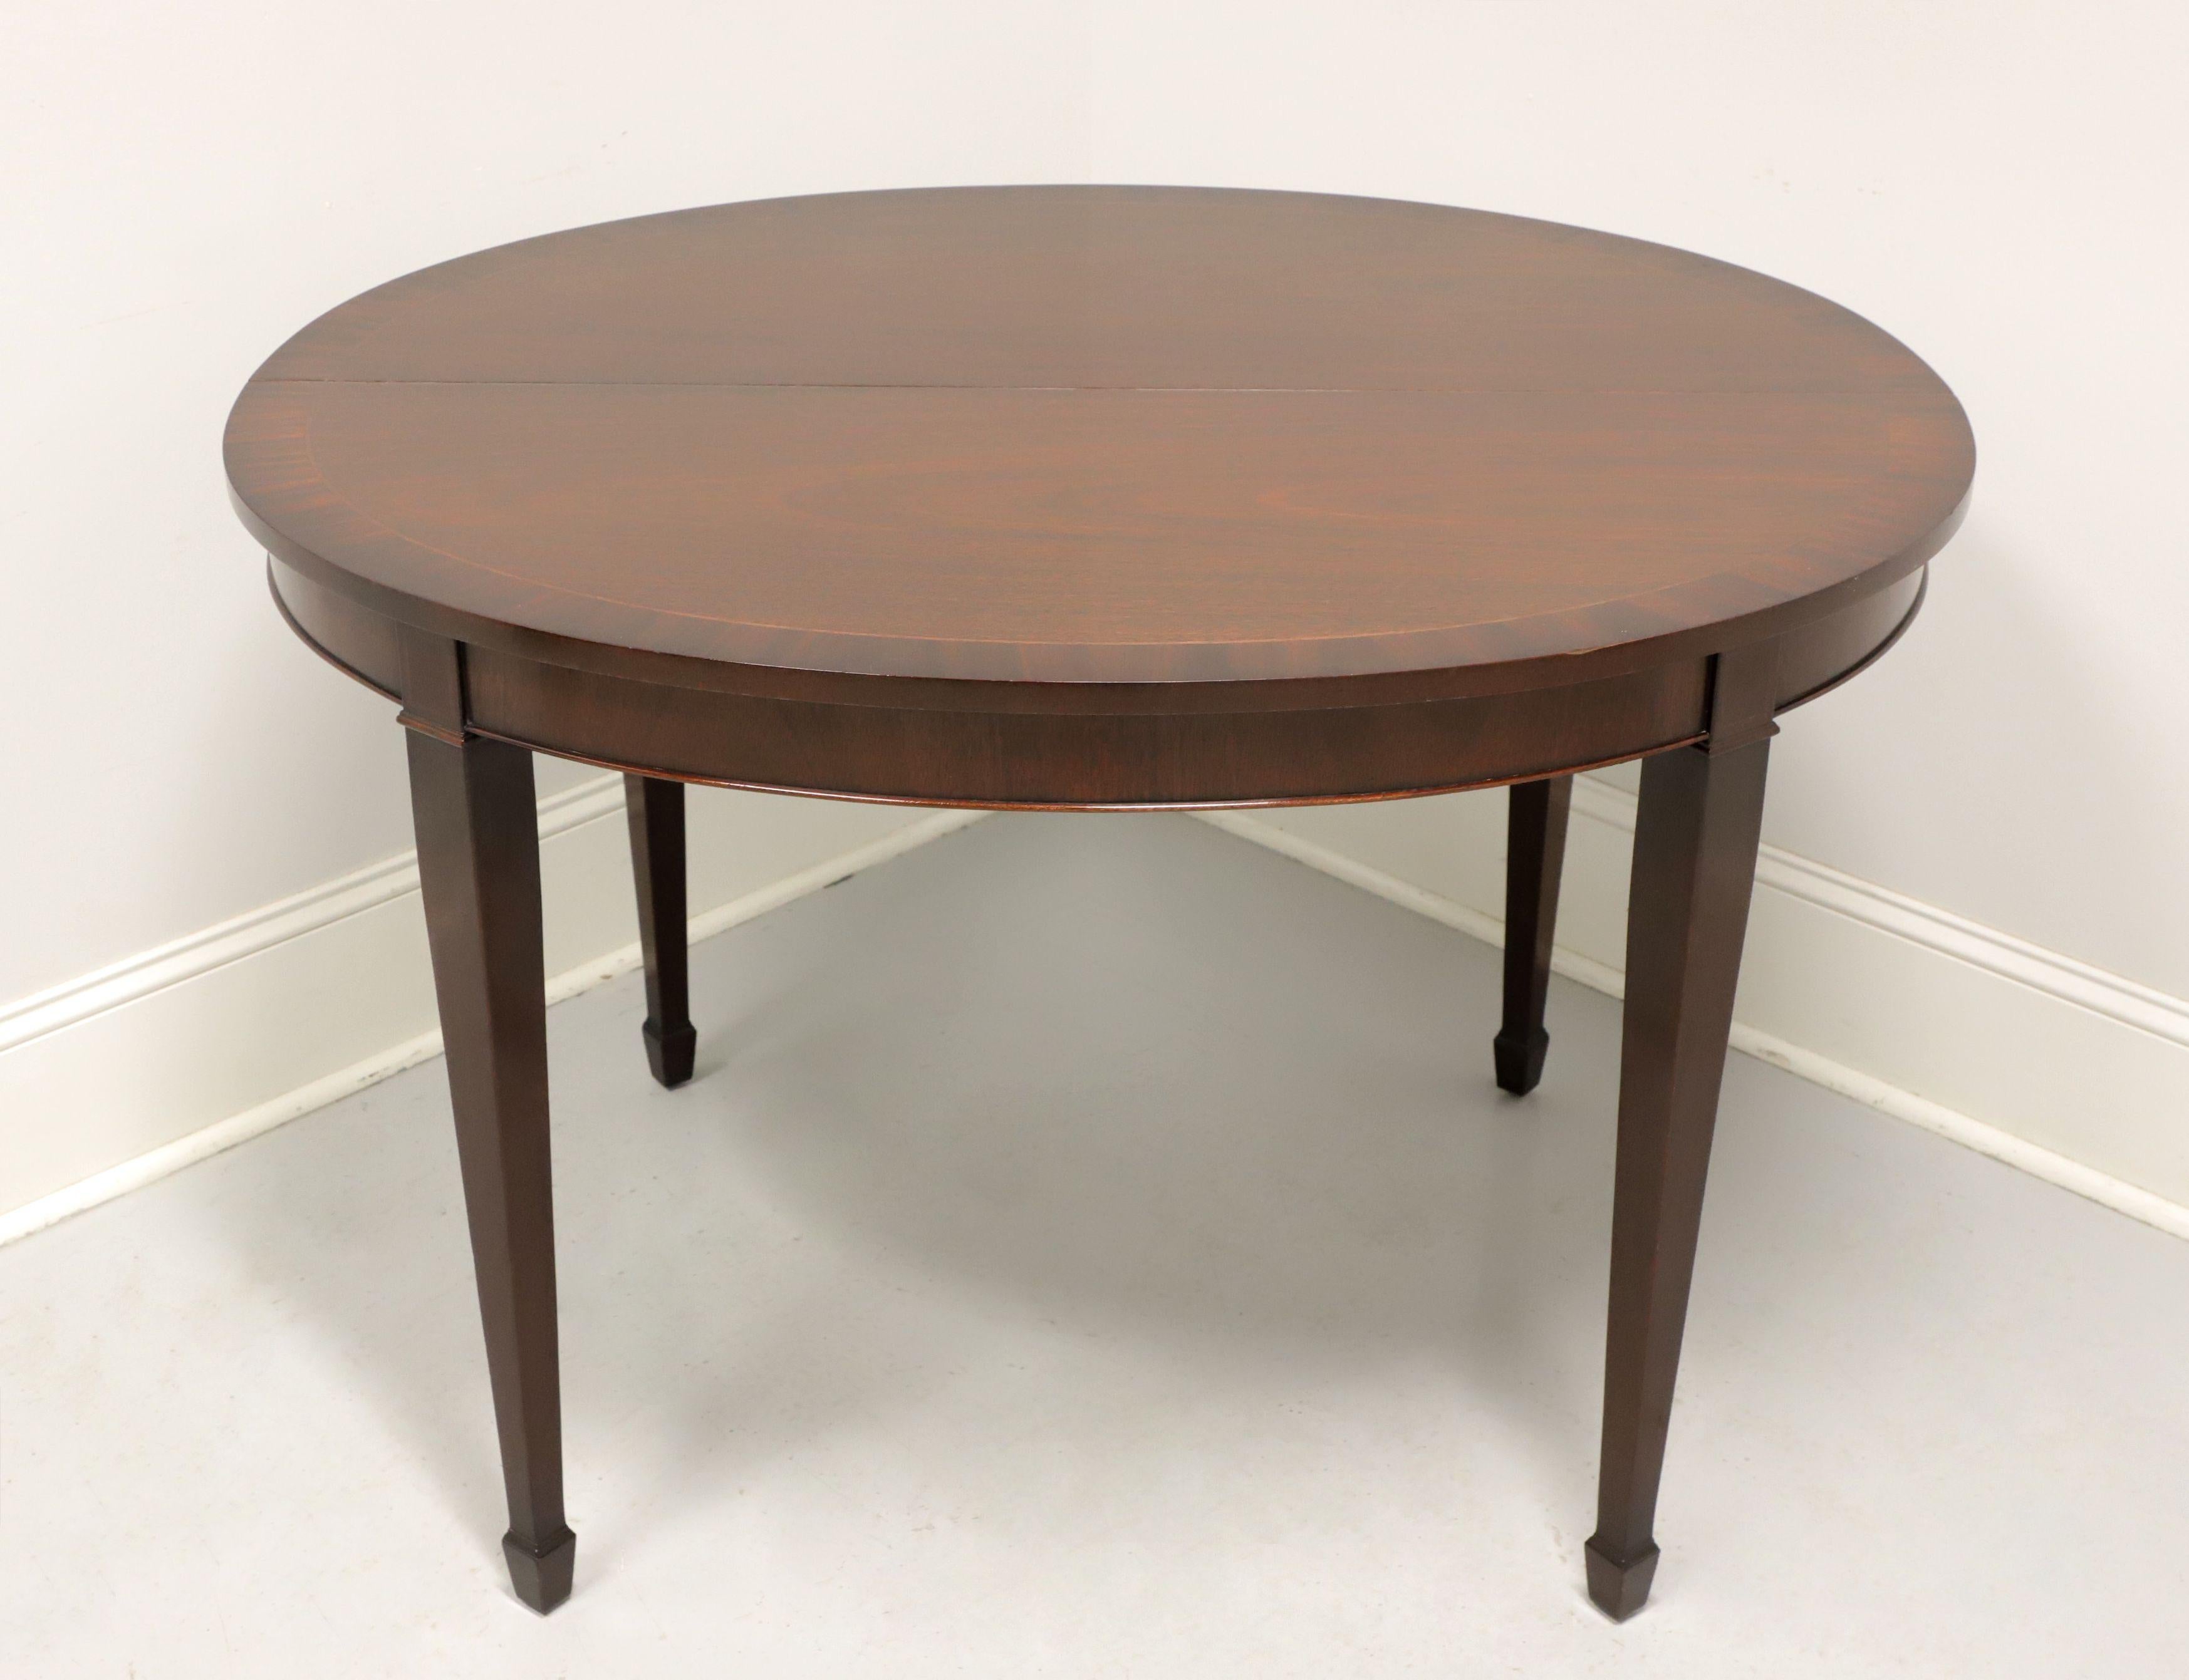 A Federal style oval dining table by Kindel Furniture, of Grand Rapids, Michigan, USA. Mahogany with banded top, their 